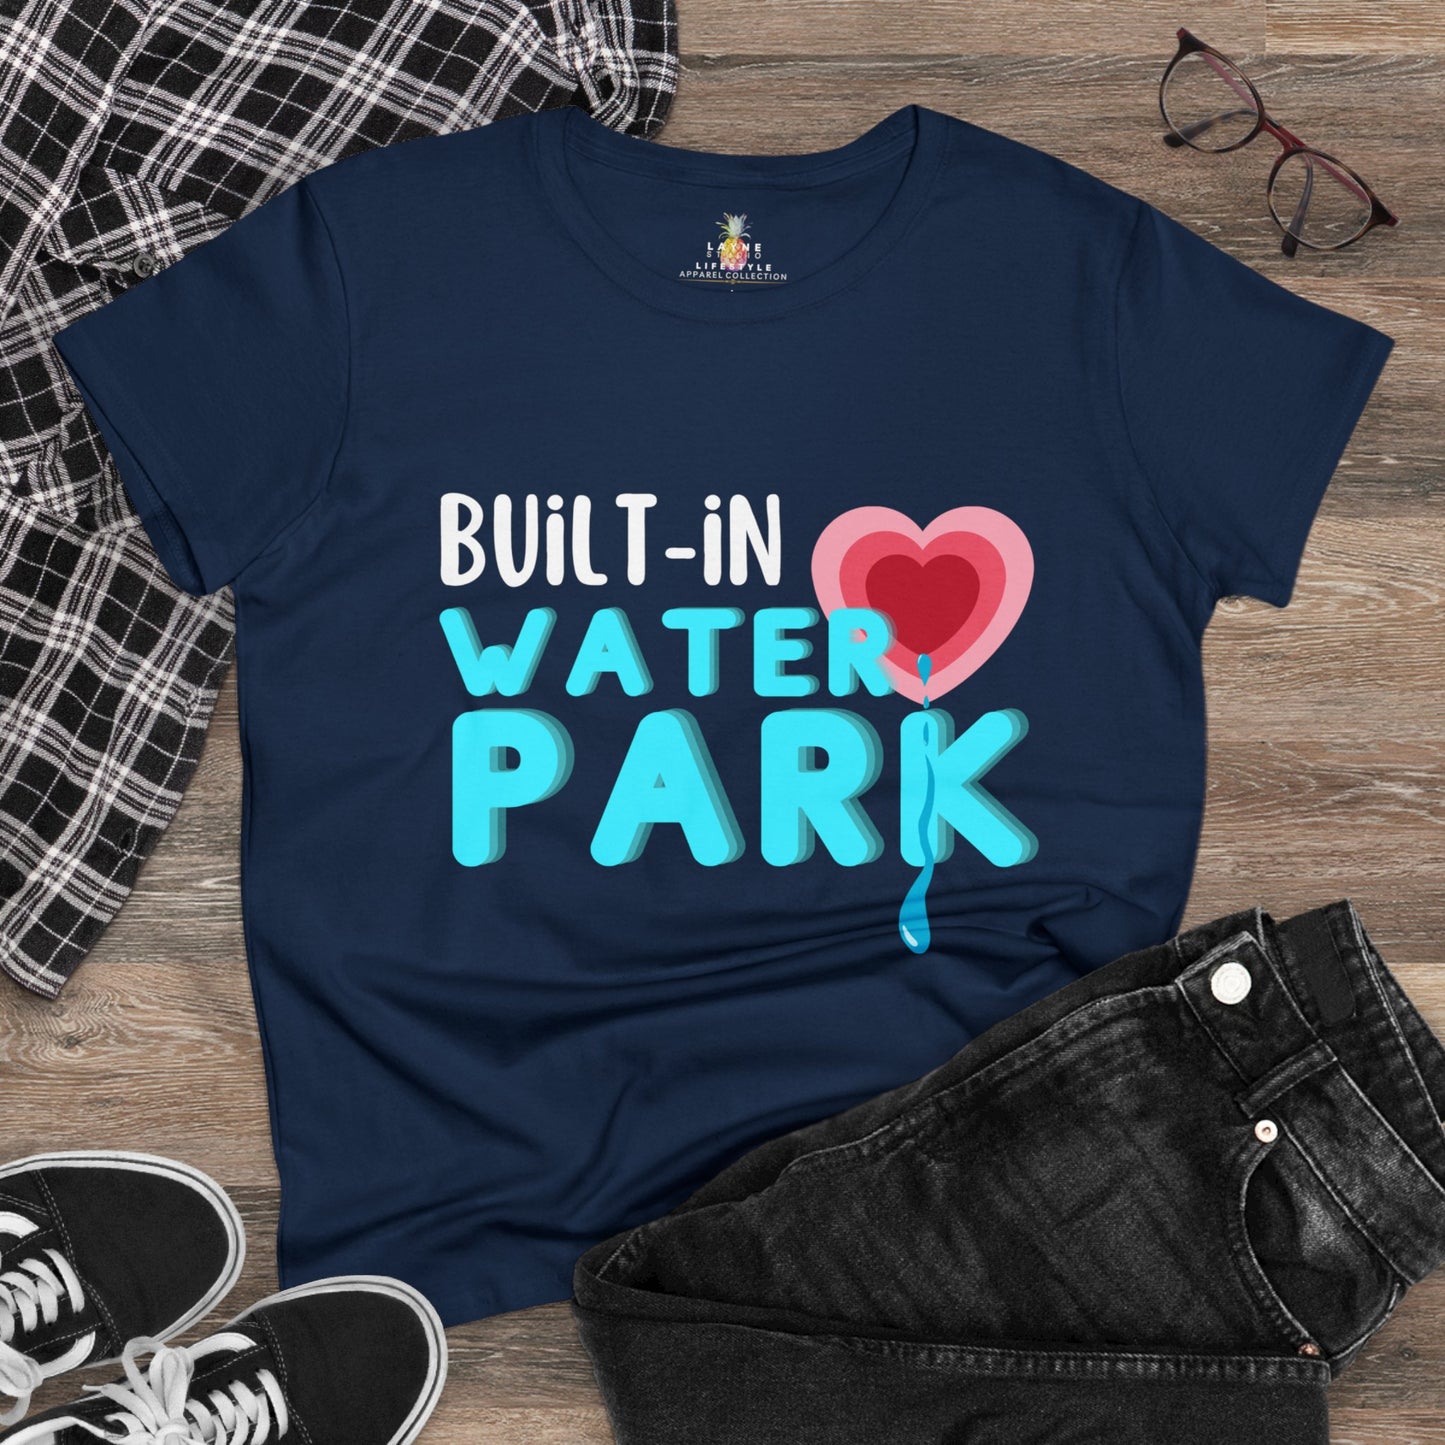 "Built-In Water Park" Graphic Women's Midweight Cotton Tee